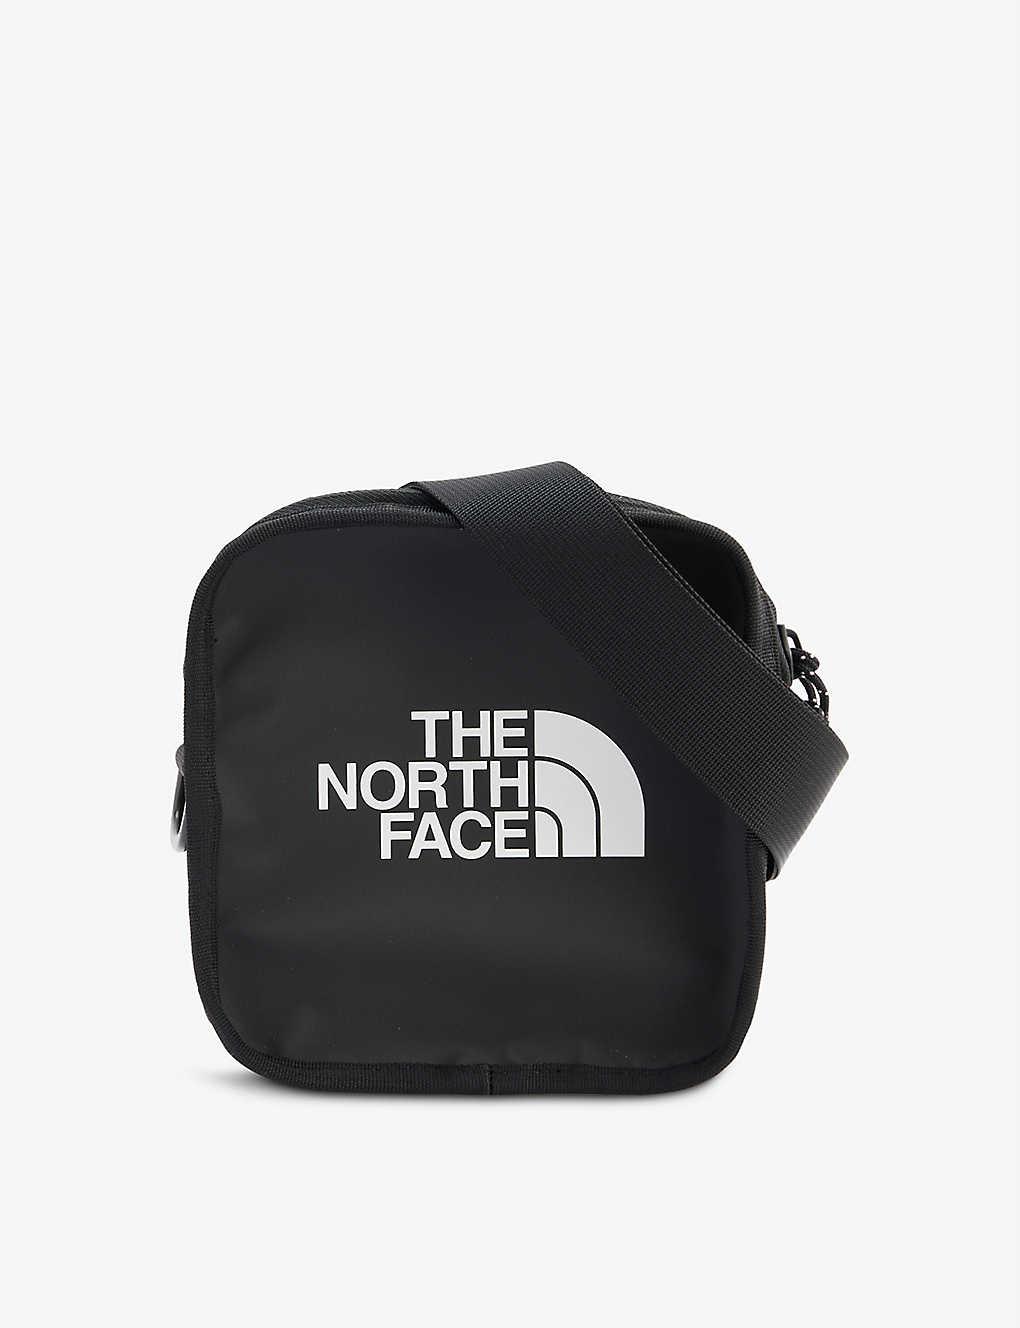 The North Face Explore Bardu Ii Woven Cross-body Bag in Black for Men | Lyst